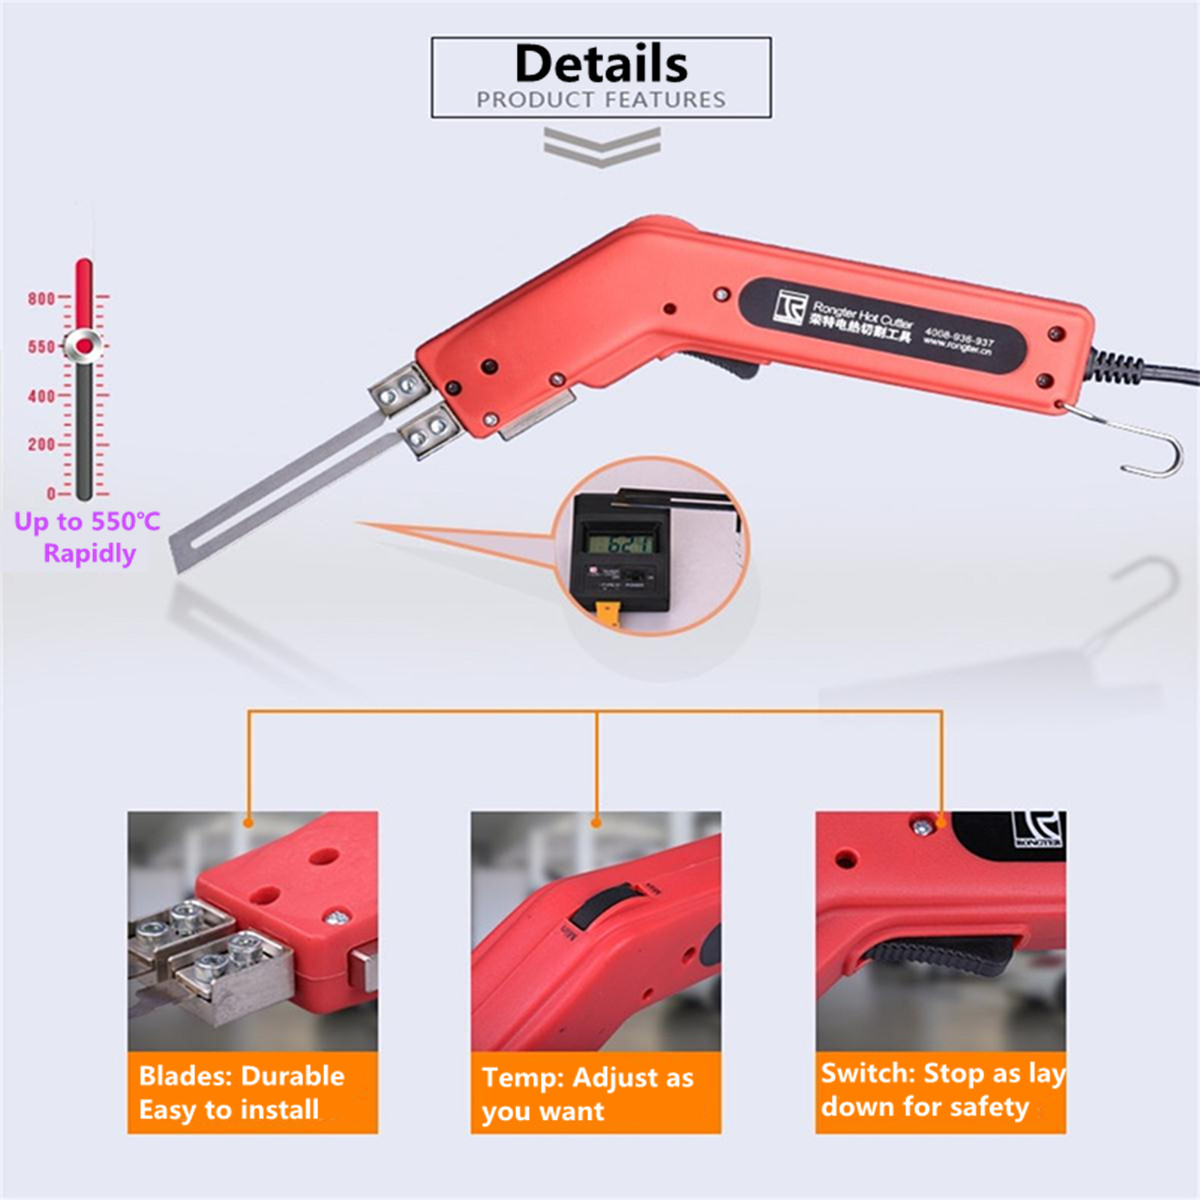 250W-220V-Nordstrand-Pro-Electric-Hot-Knife-Styrofoam-Foam-Cutter-Tool-with-Blades-Accessories-1297210-1